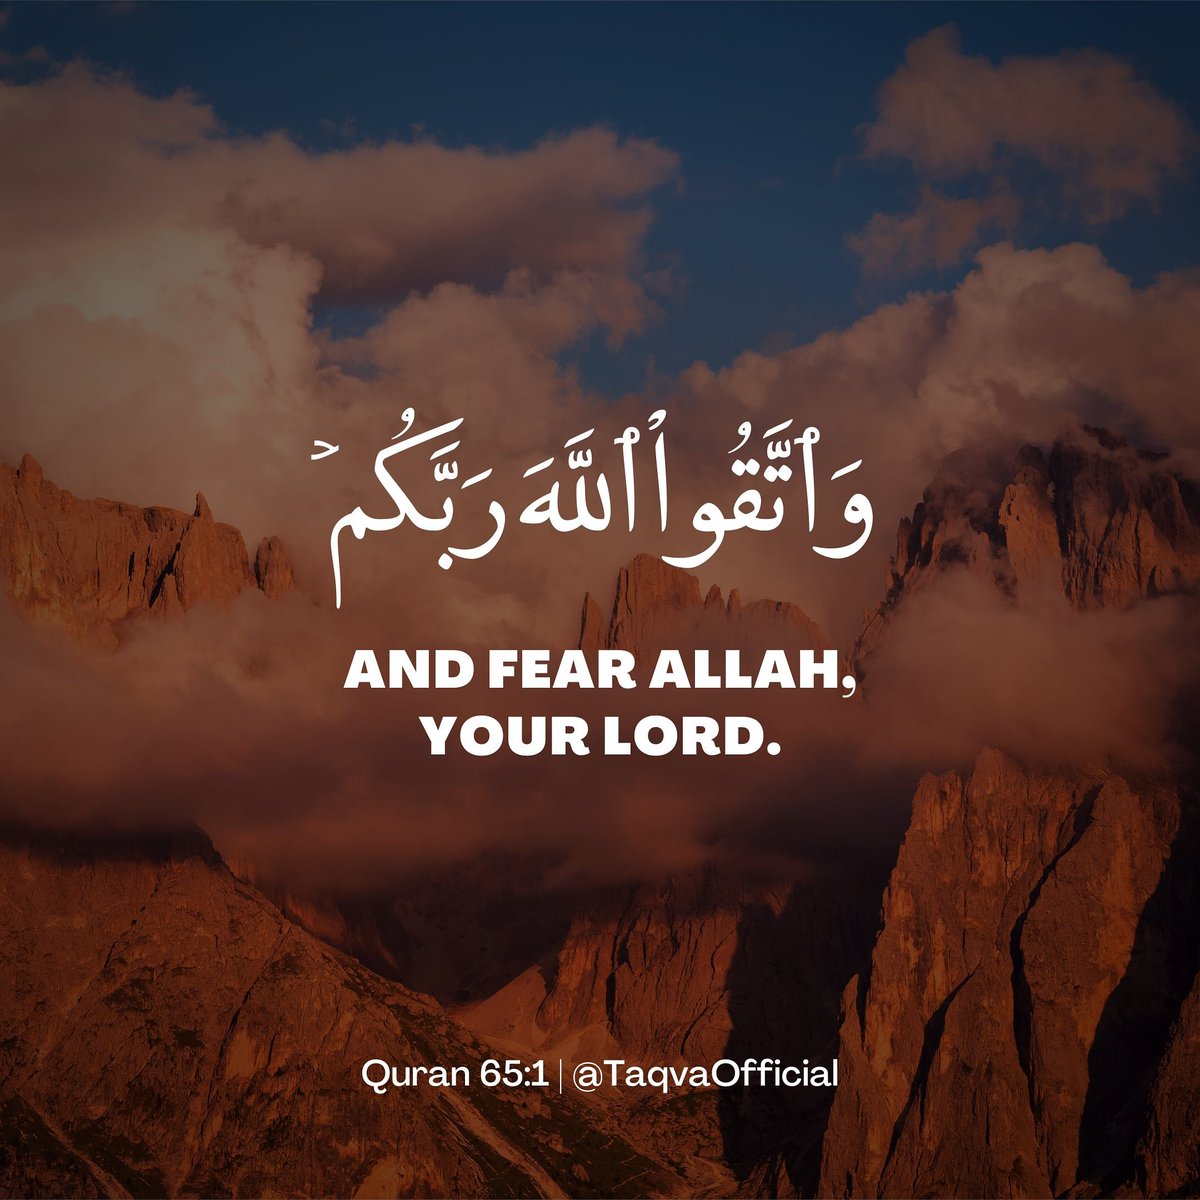 Islamic Quotes by Taqva on Twitter: 